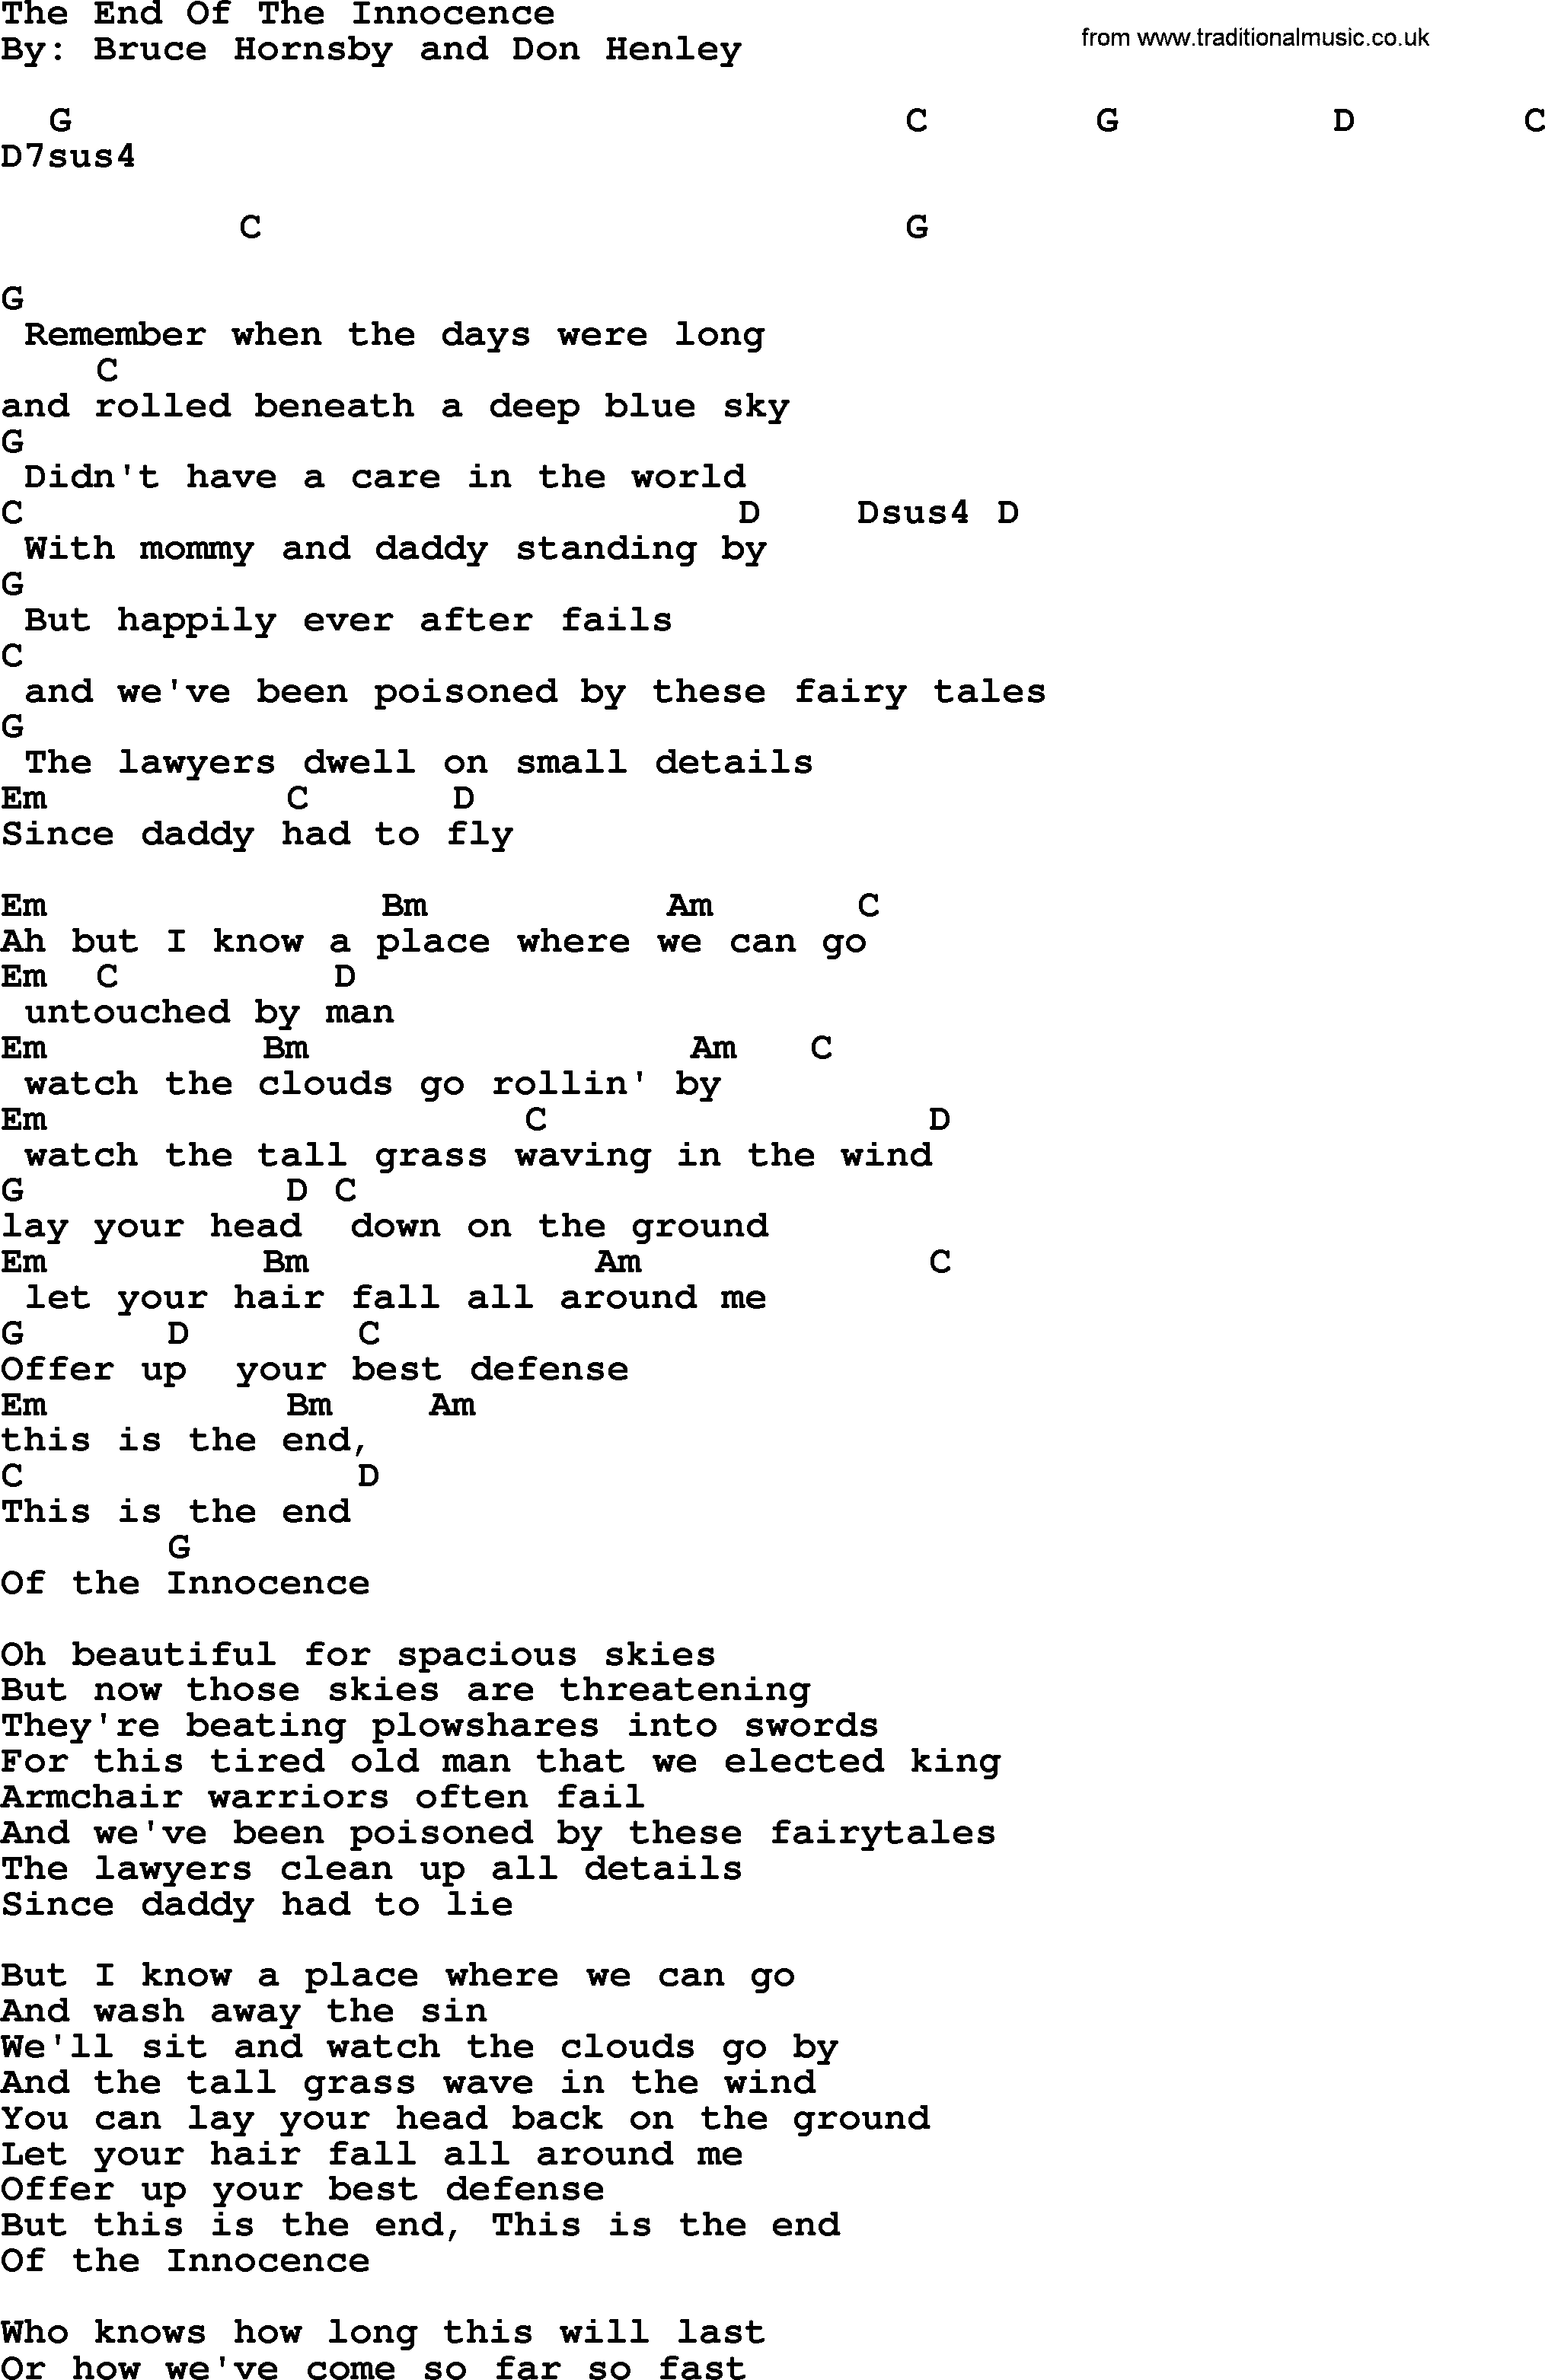 Bob Dylan song, lyrics with chords - The End Of The Innocence